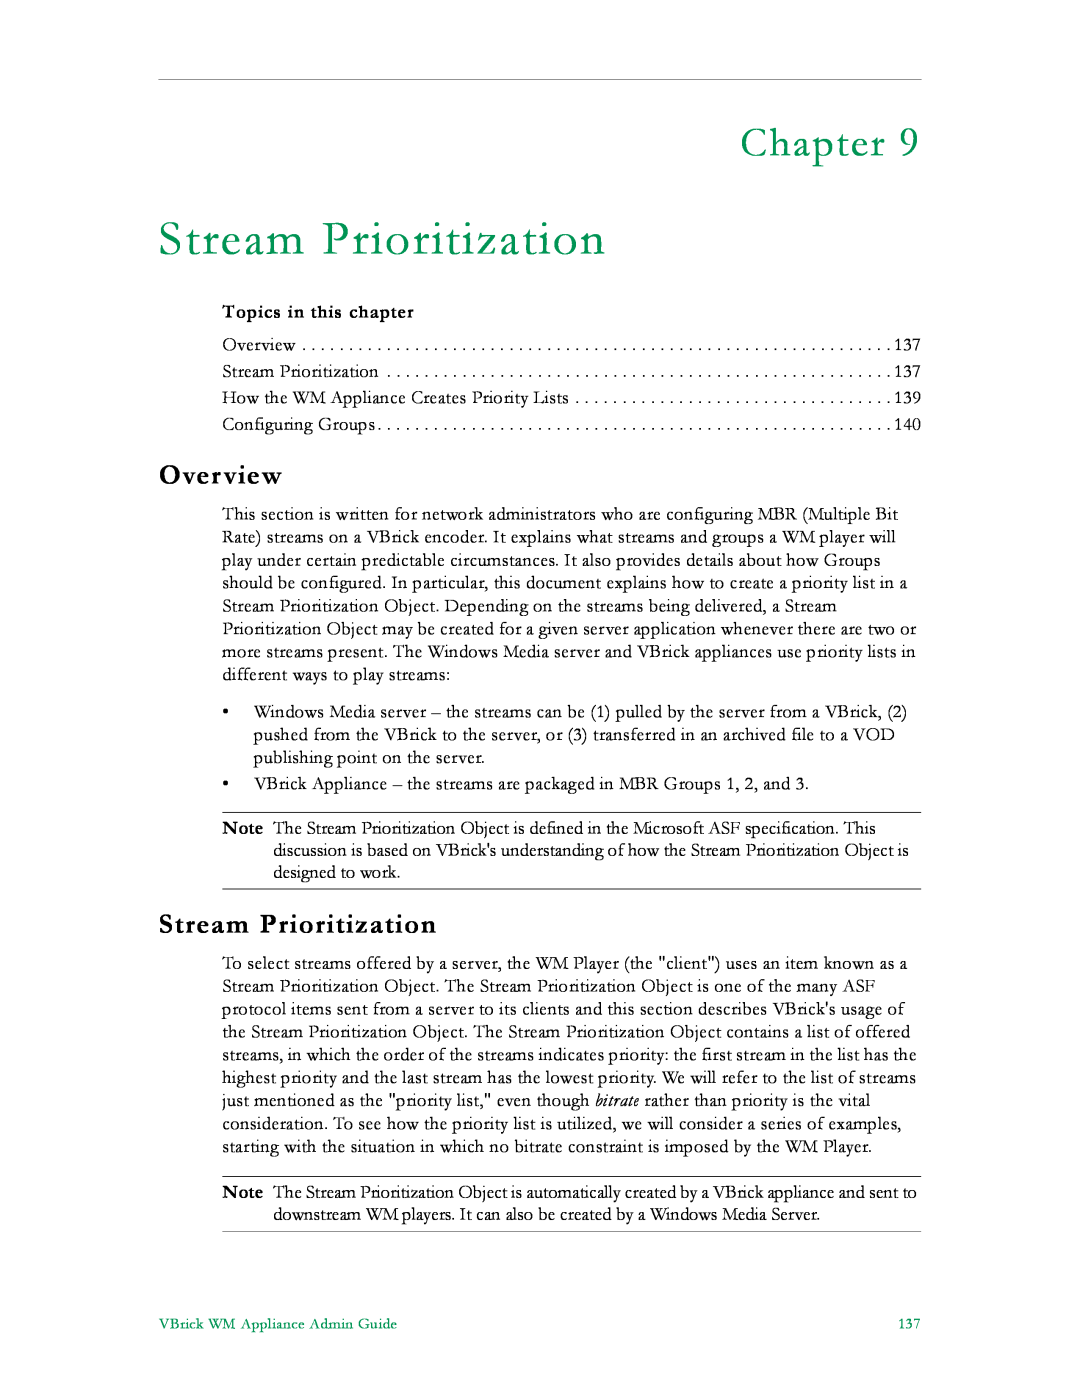 VBrick Systems VB6000, VB4000, VB5000 manual Stream Prioritization, Chapter, Overview, Topics in this chapter 